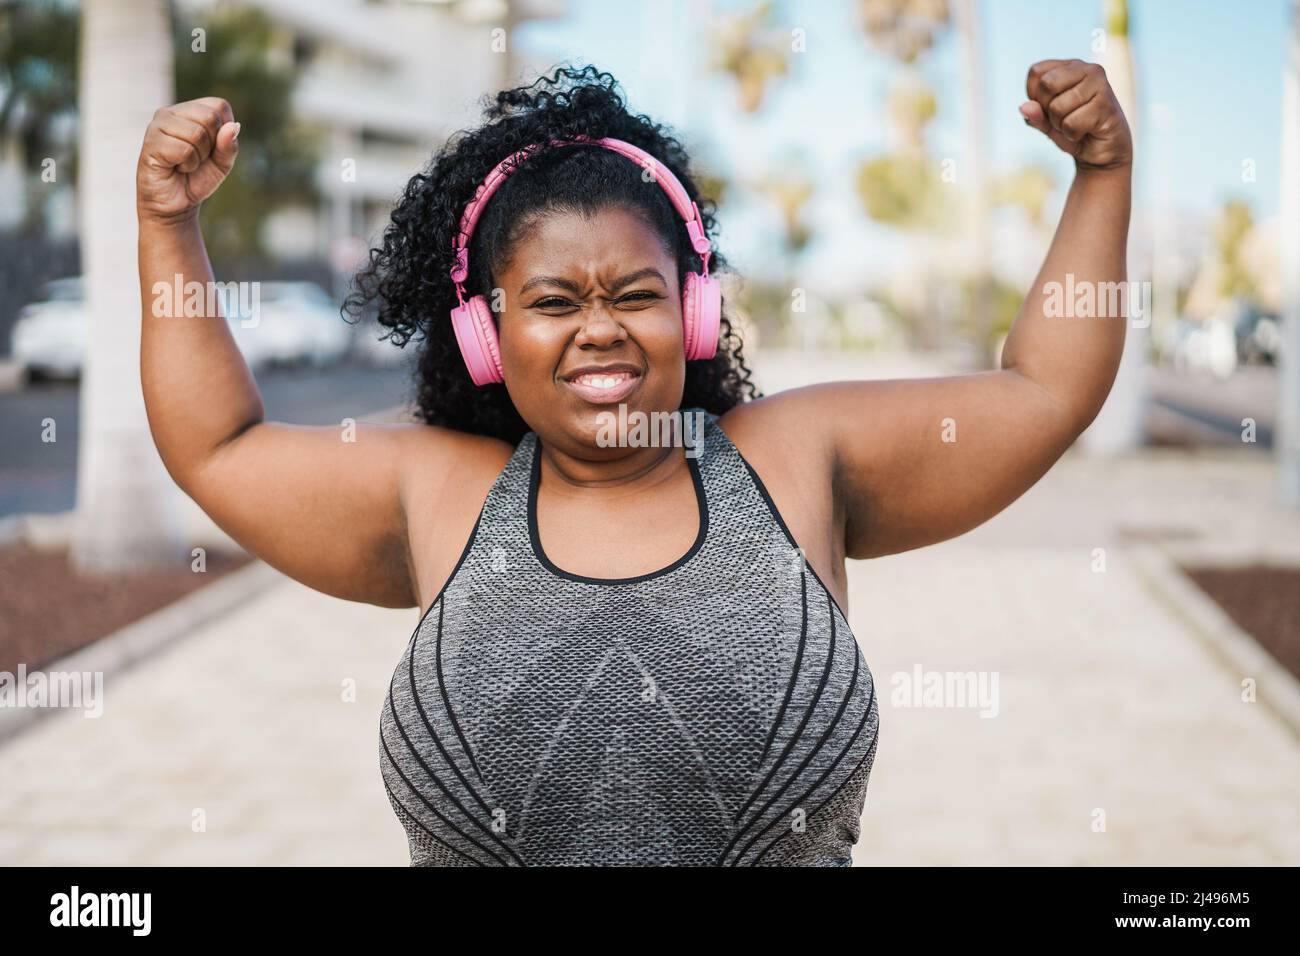 Happy Curvy African Woman Doing Workout Routine Outdoor Focus On Face